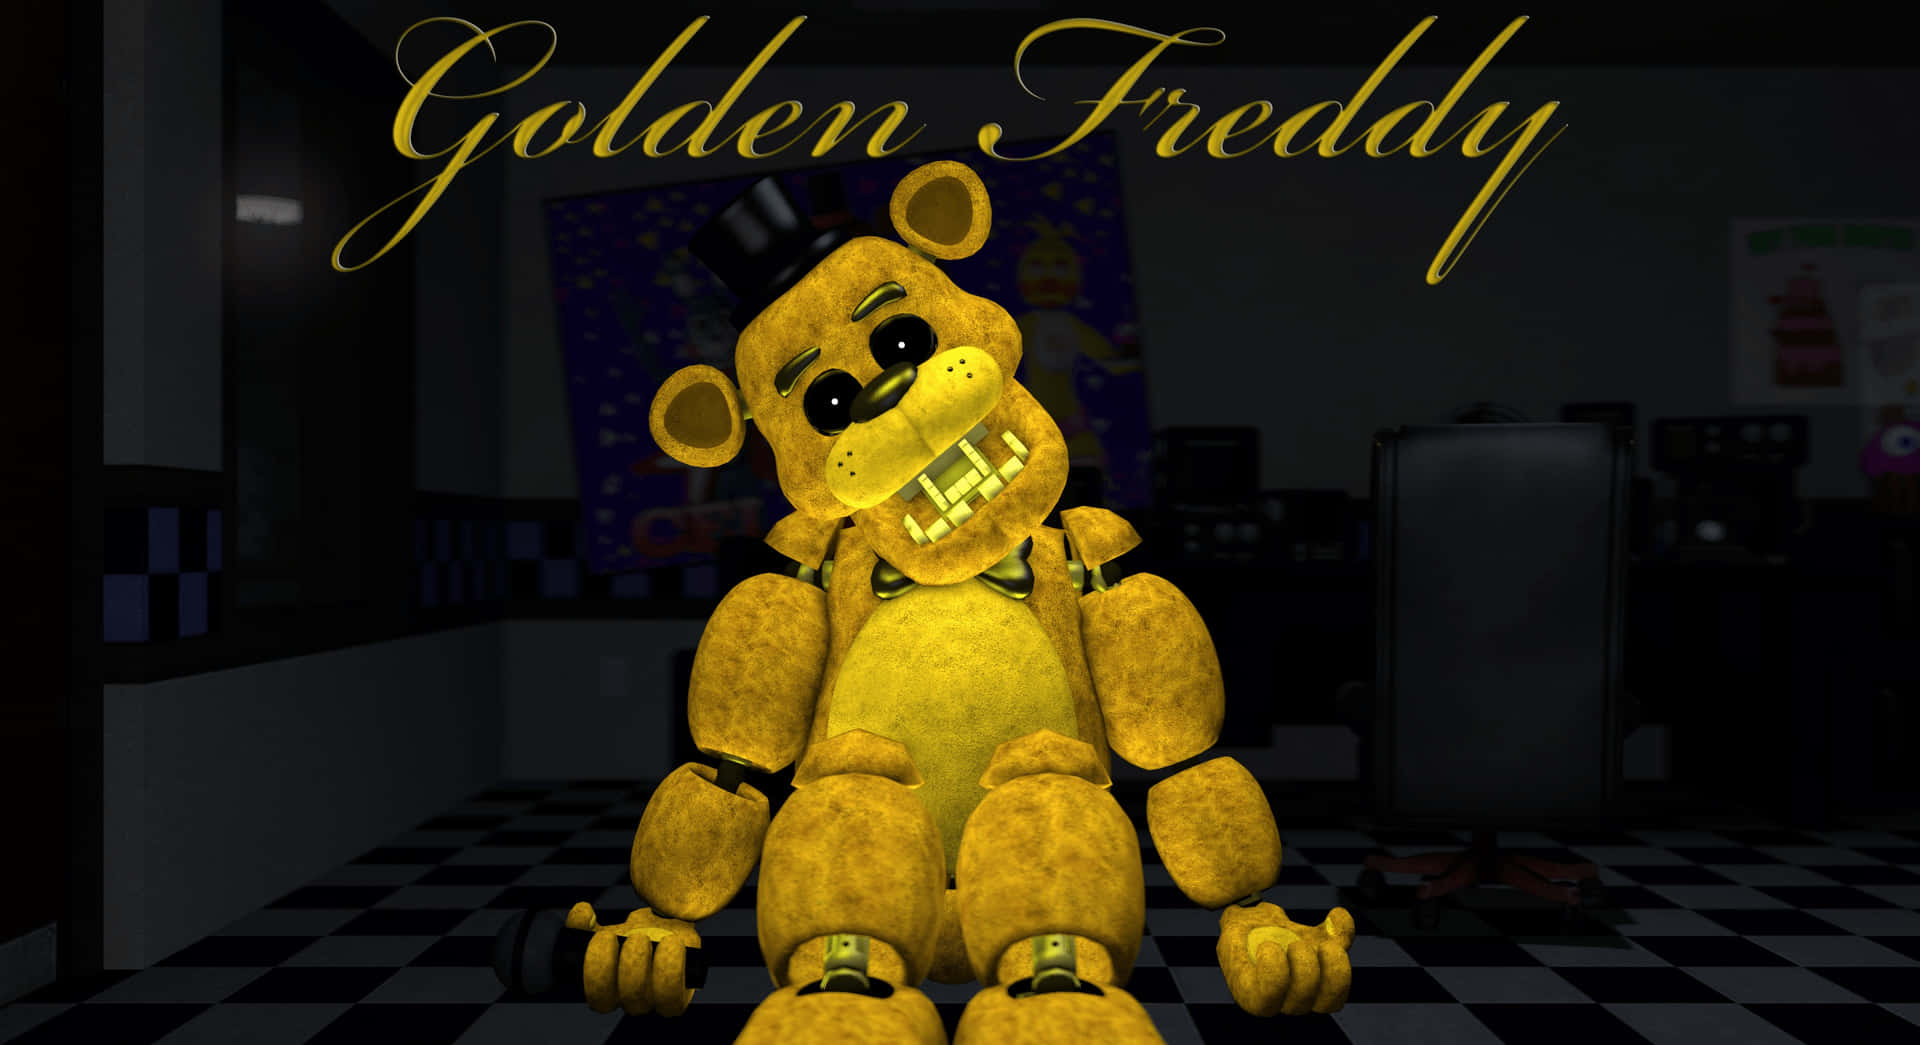 Mysterious Golden Freddy - Uncover the terror! Wallpaper